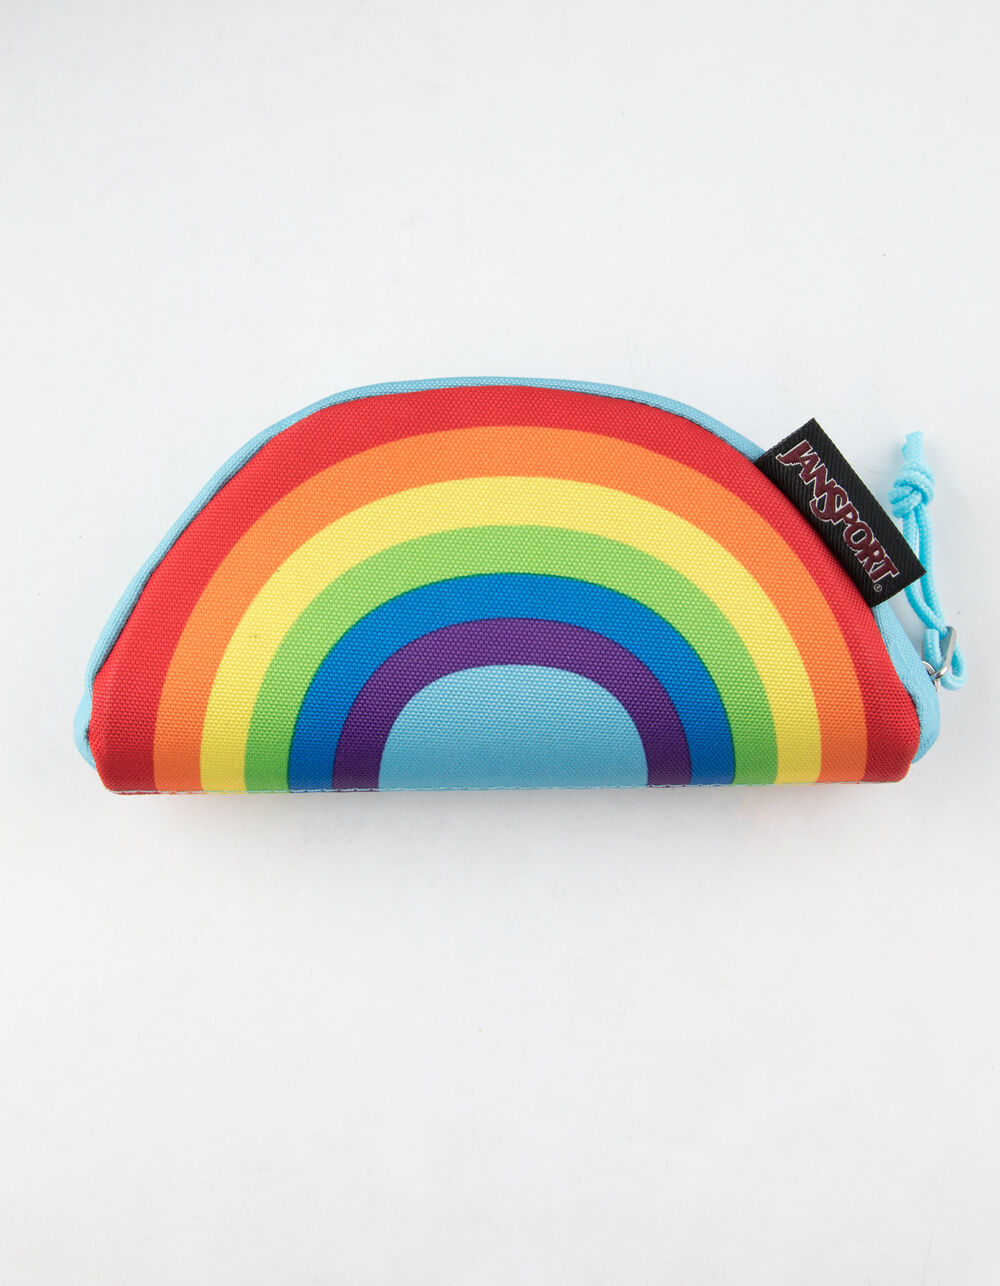 JANSPORT Lil Wedge Rainbow Pouch image number 0